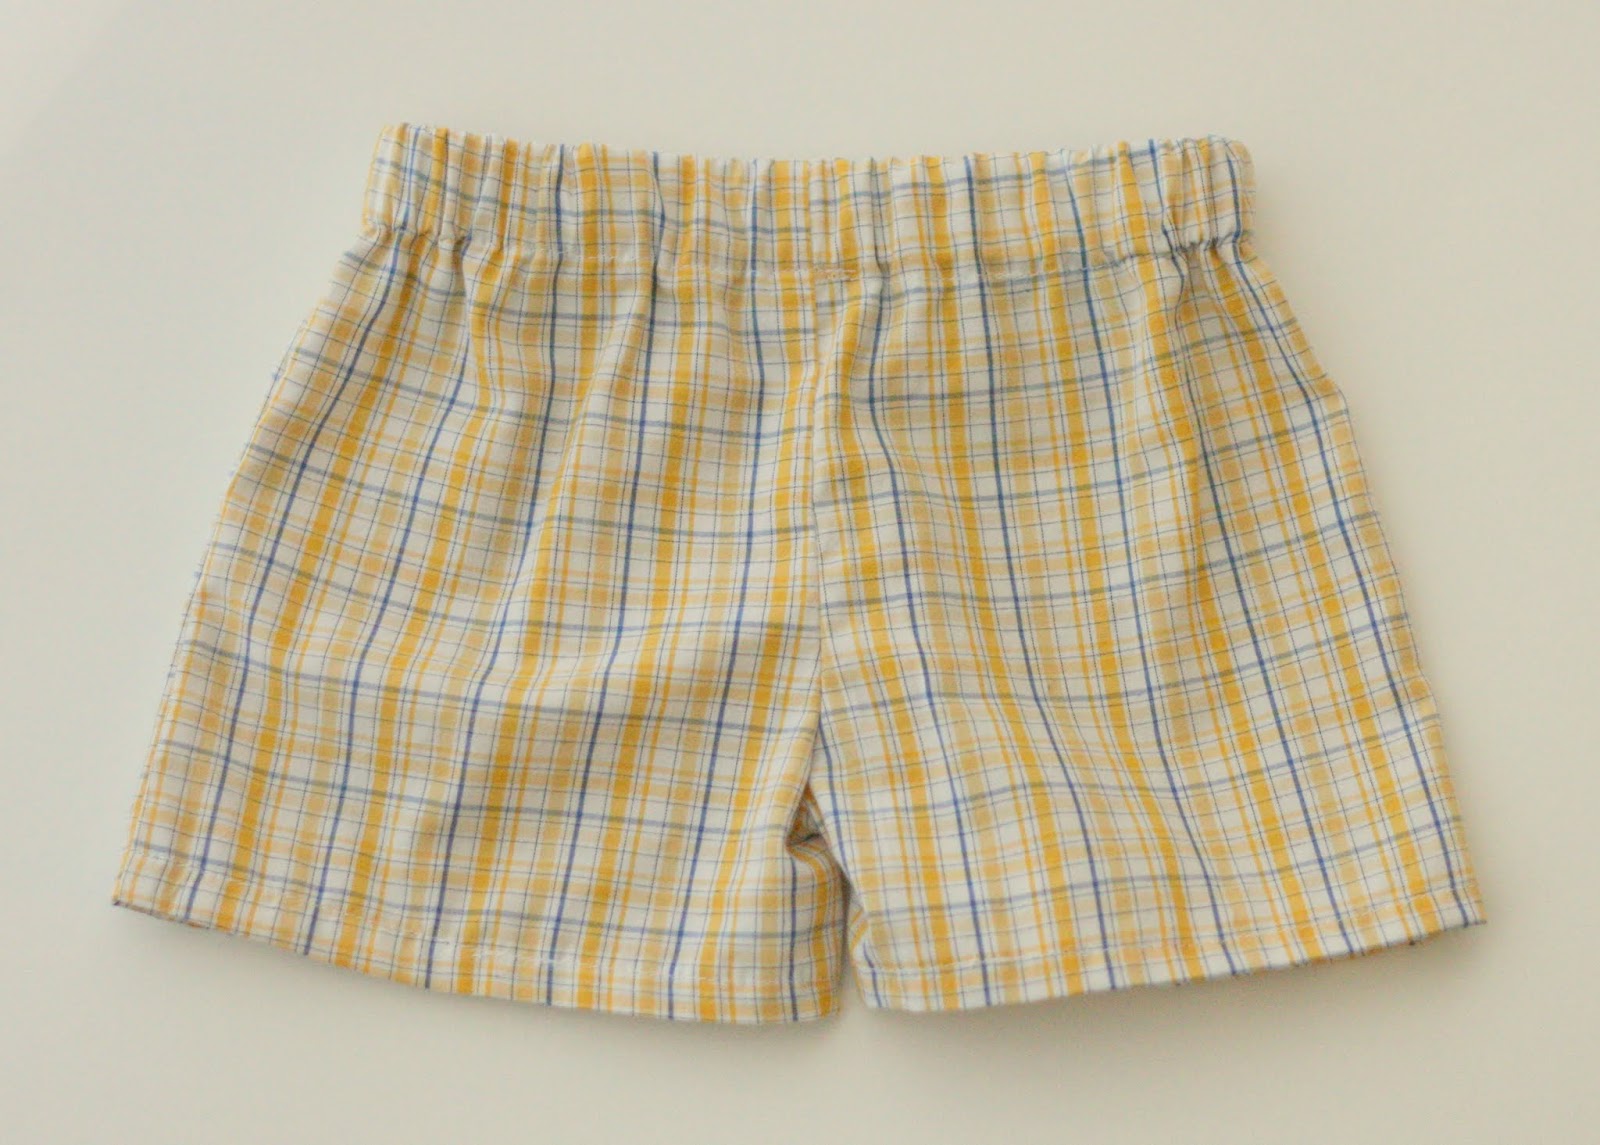 crafting-zuzzy-shorts-for-baby-boy-free-pattern